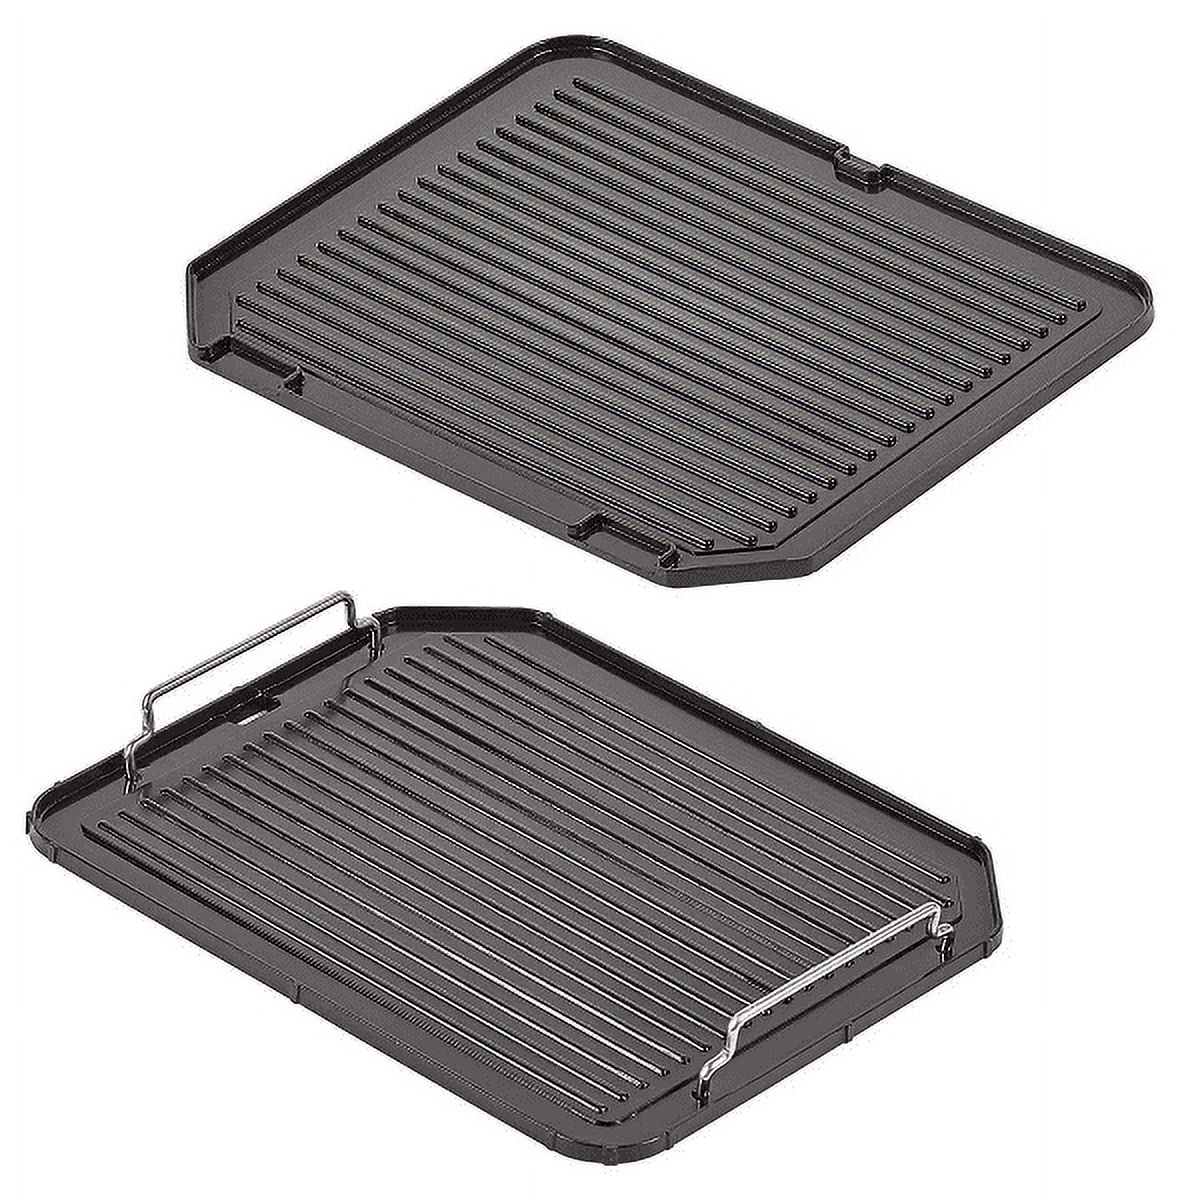 SHAQ 22 XL 1650W Smokeless 2-in-1 Indoor Electric Grill & Griddle